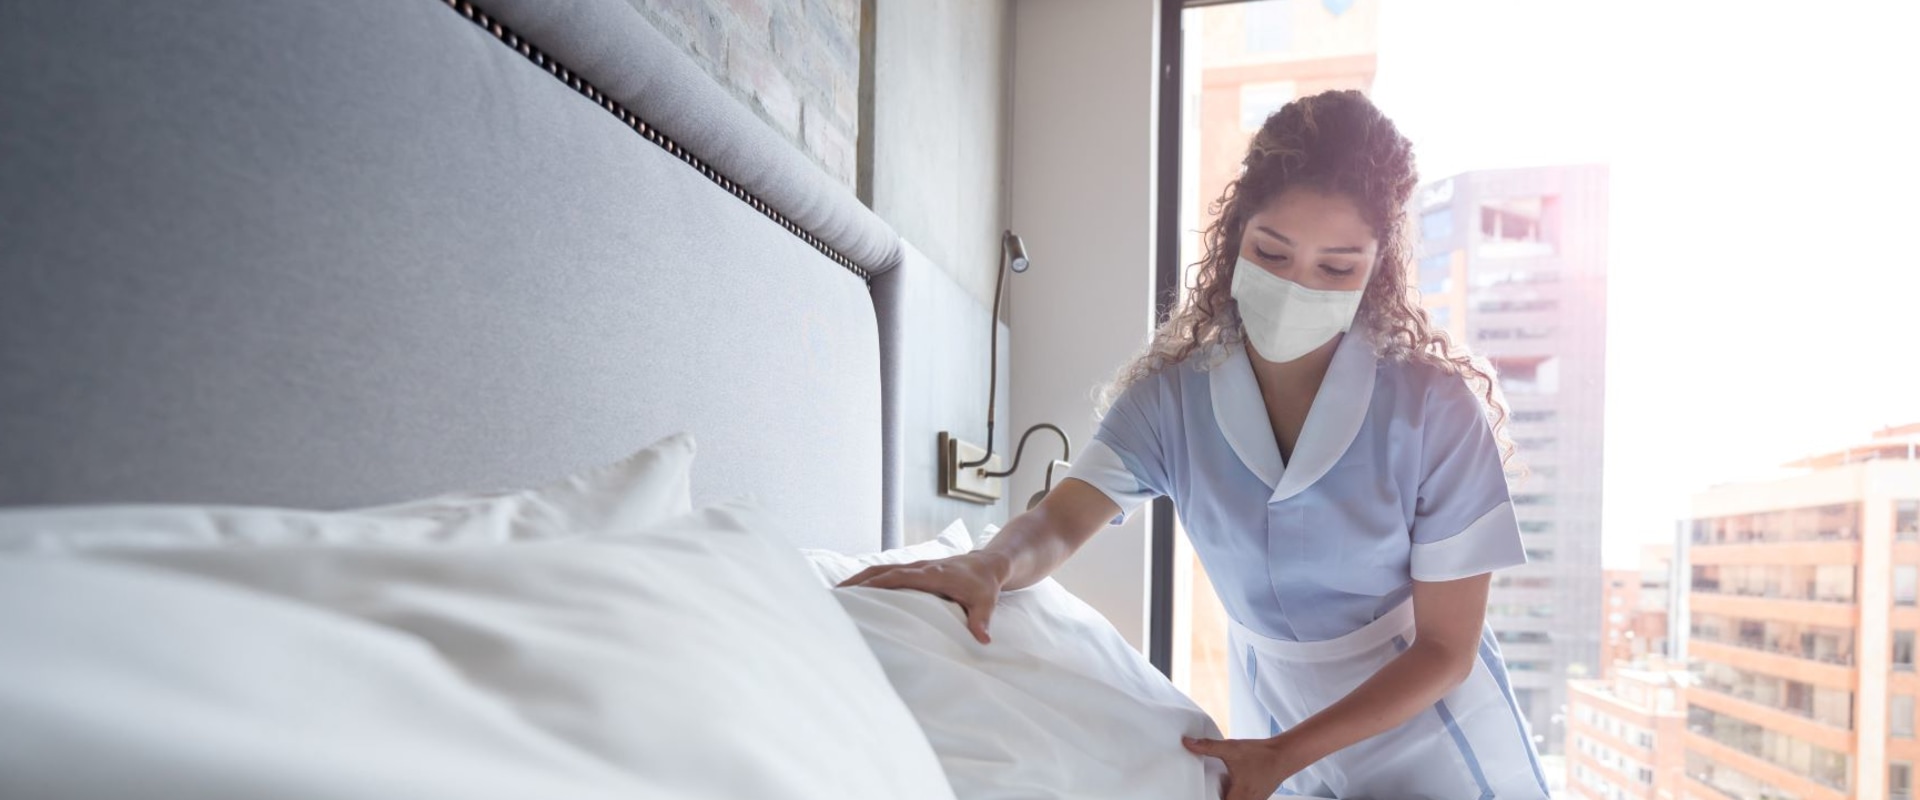 How Hotel Software Can Help Manage Housekeeping Tasks